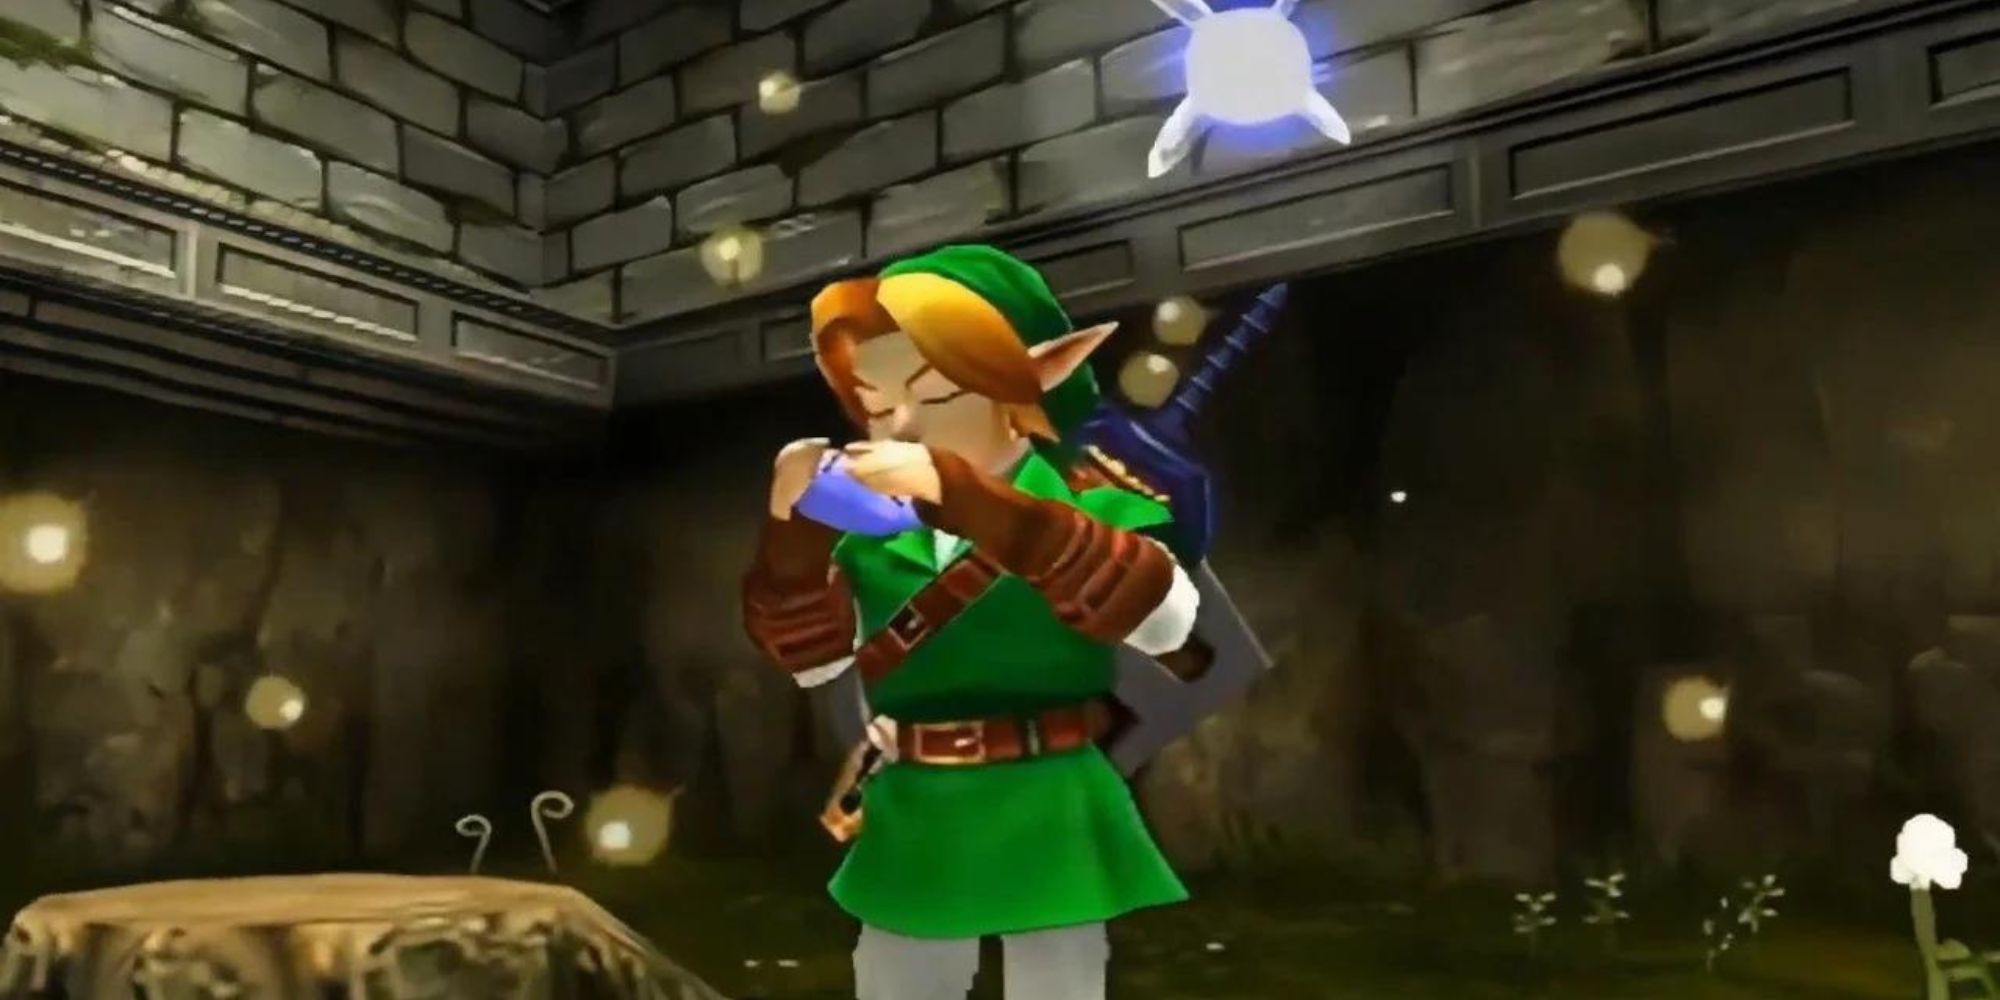 Link plays the Ocarina in the Lost Woods